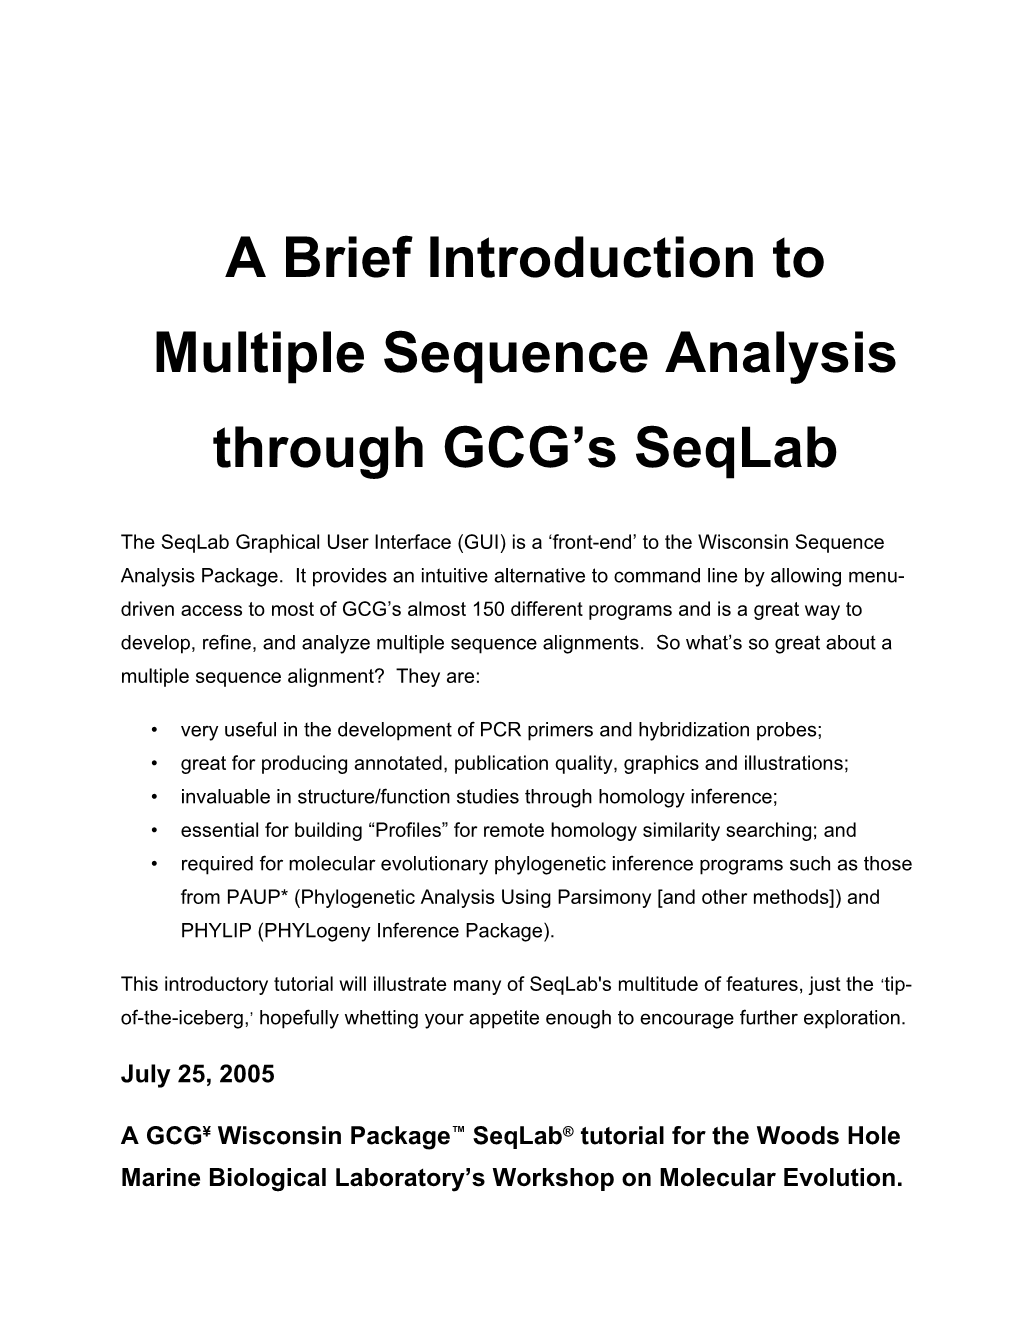 A Brief Introduction to Multiple Sequence Analysis Through GCG S Seqlab